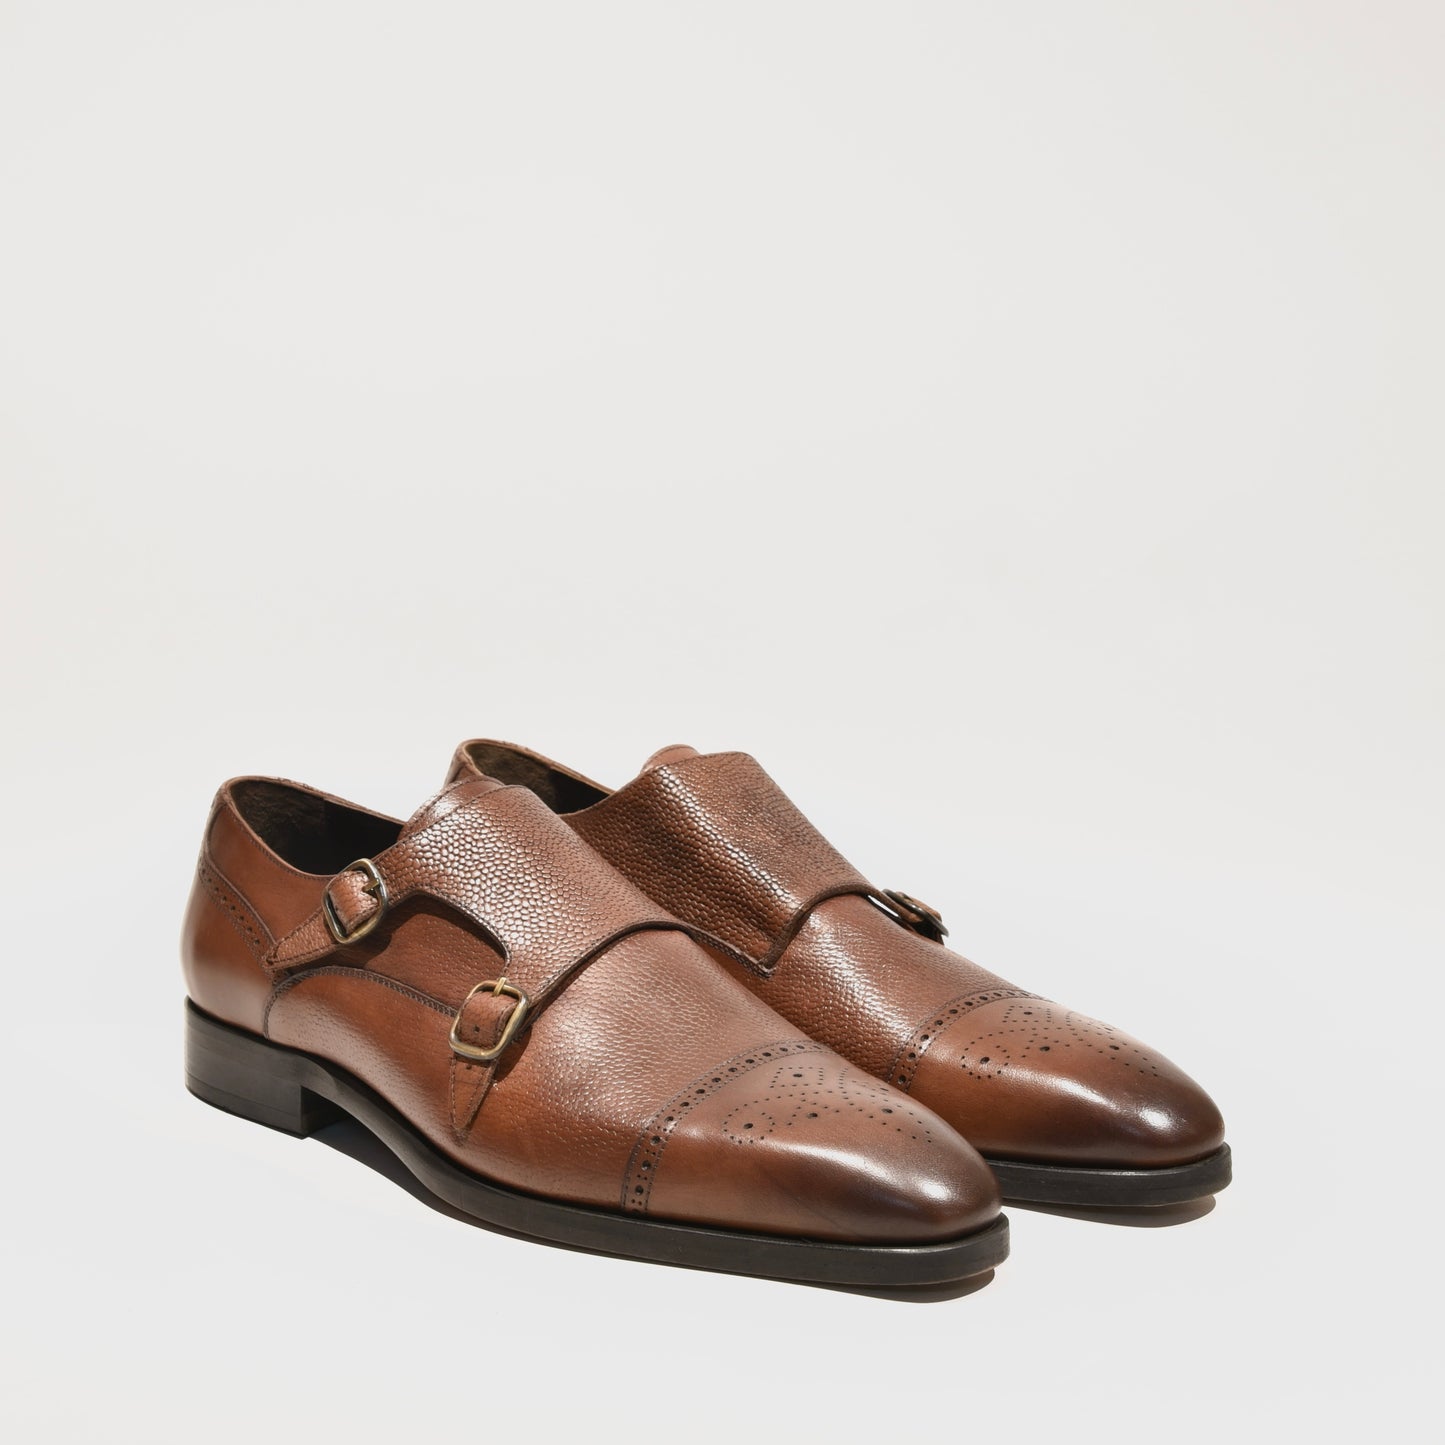 Cabani Turkish shoes for men in brown